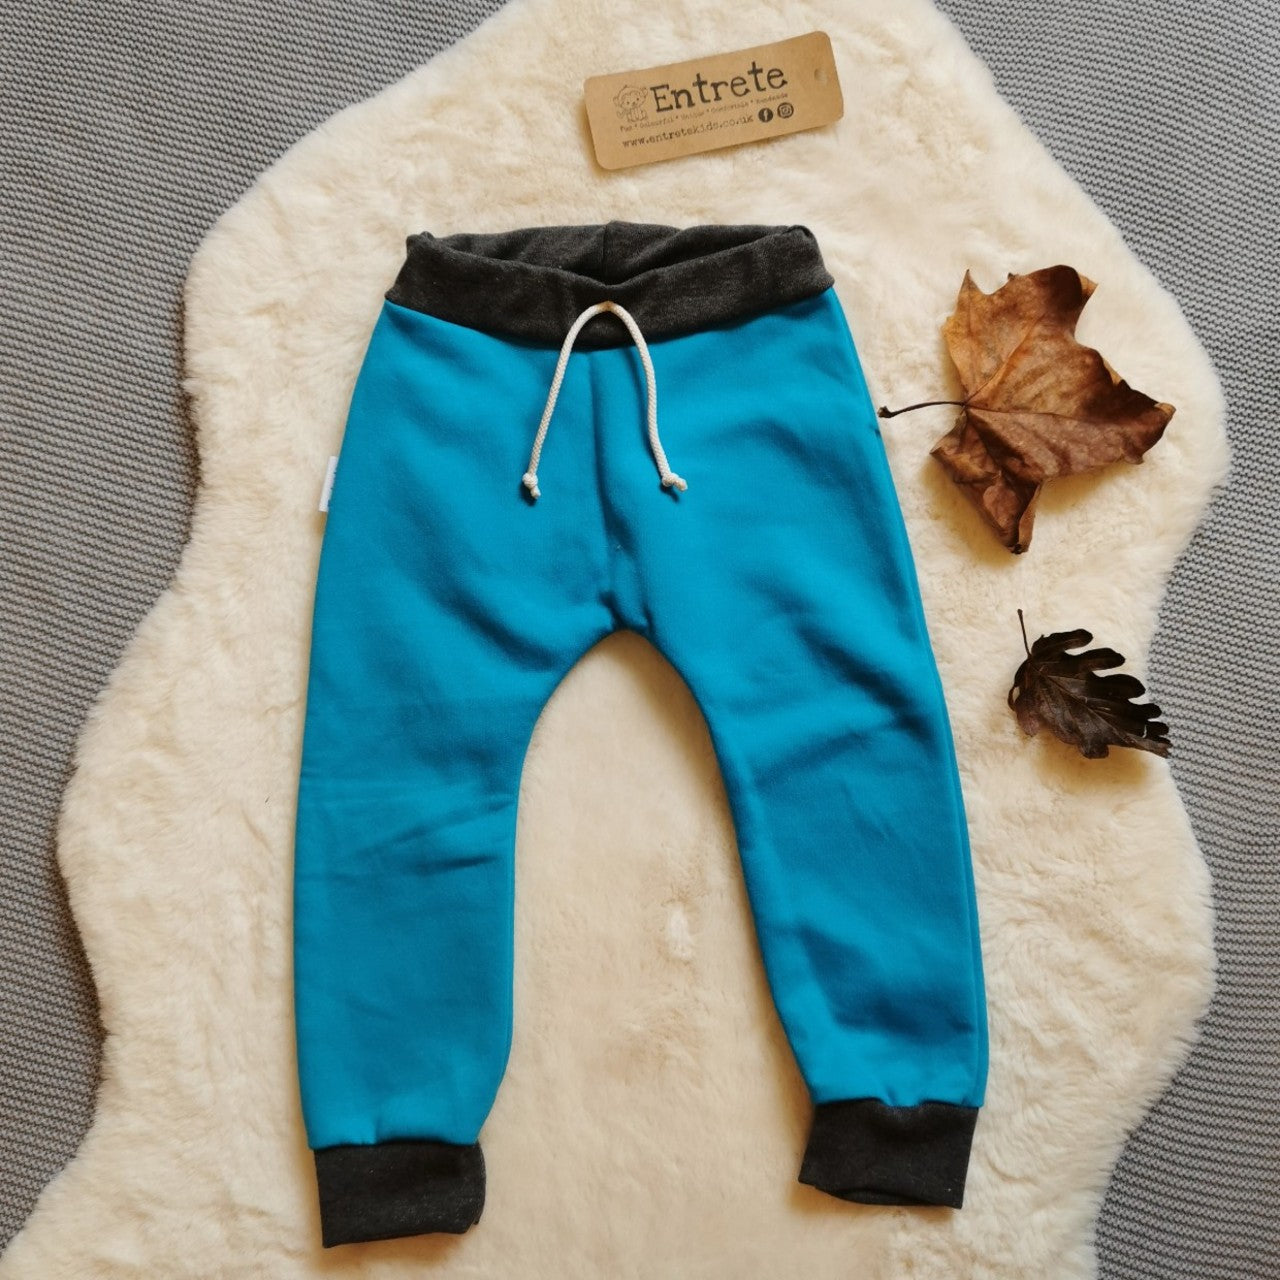 Harem joggers with elasticated waist, dropped crotch and roll-able ankle cuffs. Handmade using warm and vibrant sky blue cotton sweatshirt fleece, graphite ribbing and rainbow striped cotton jersey for the pocket.